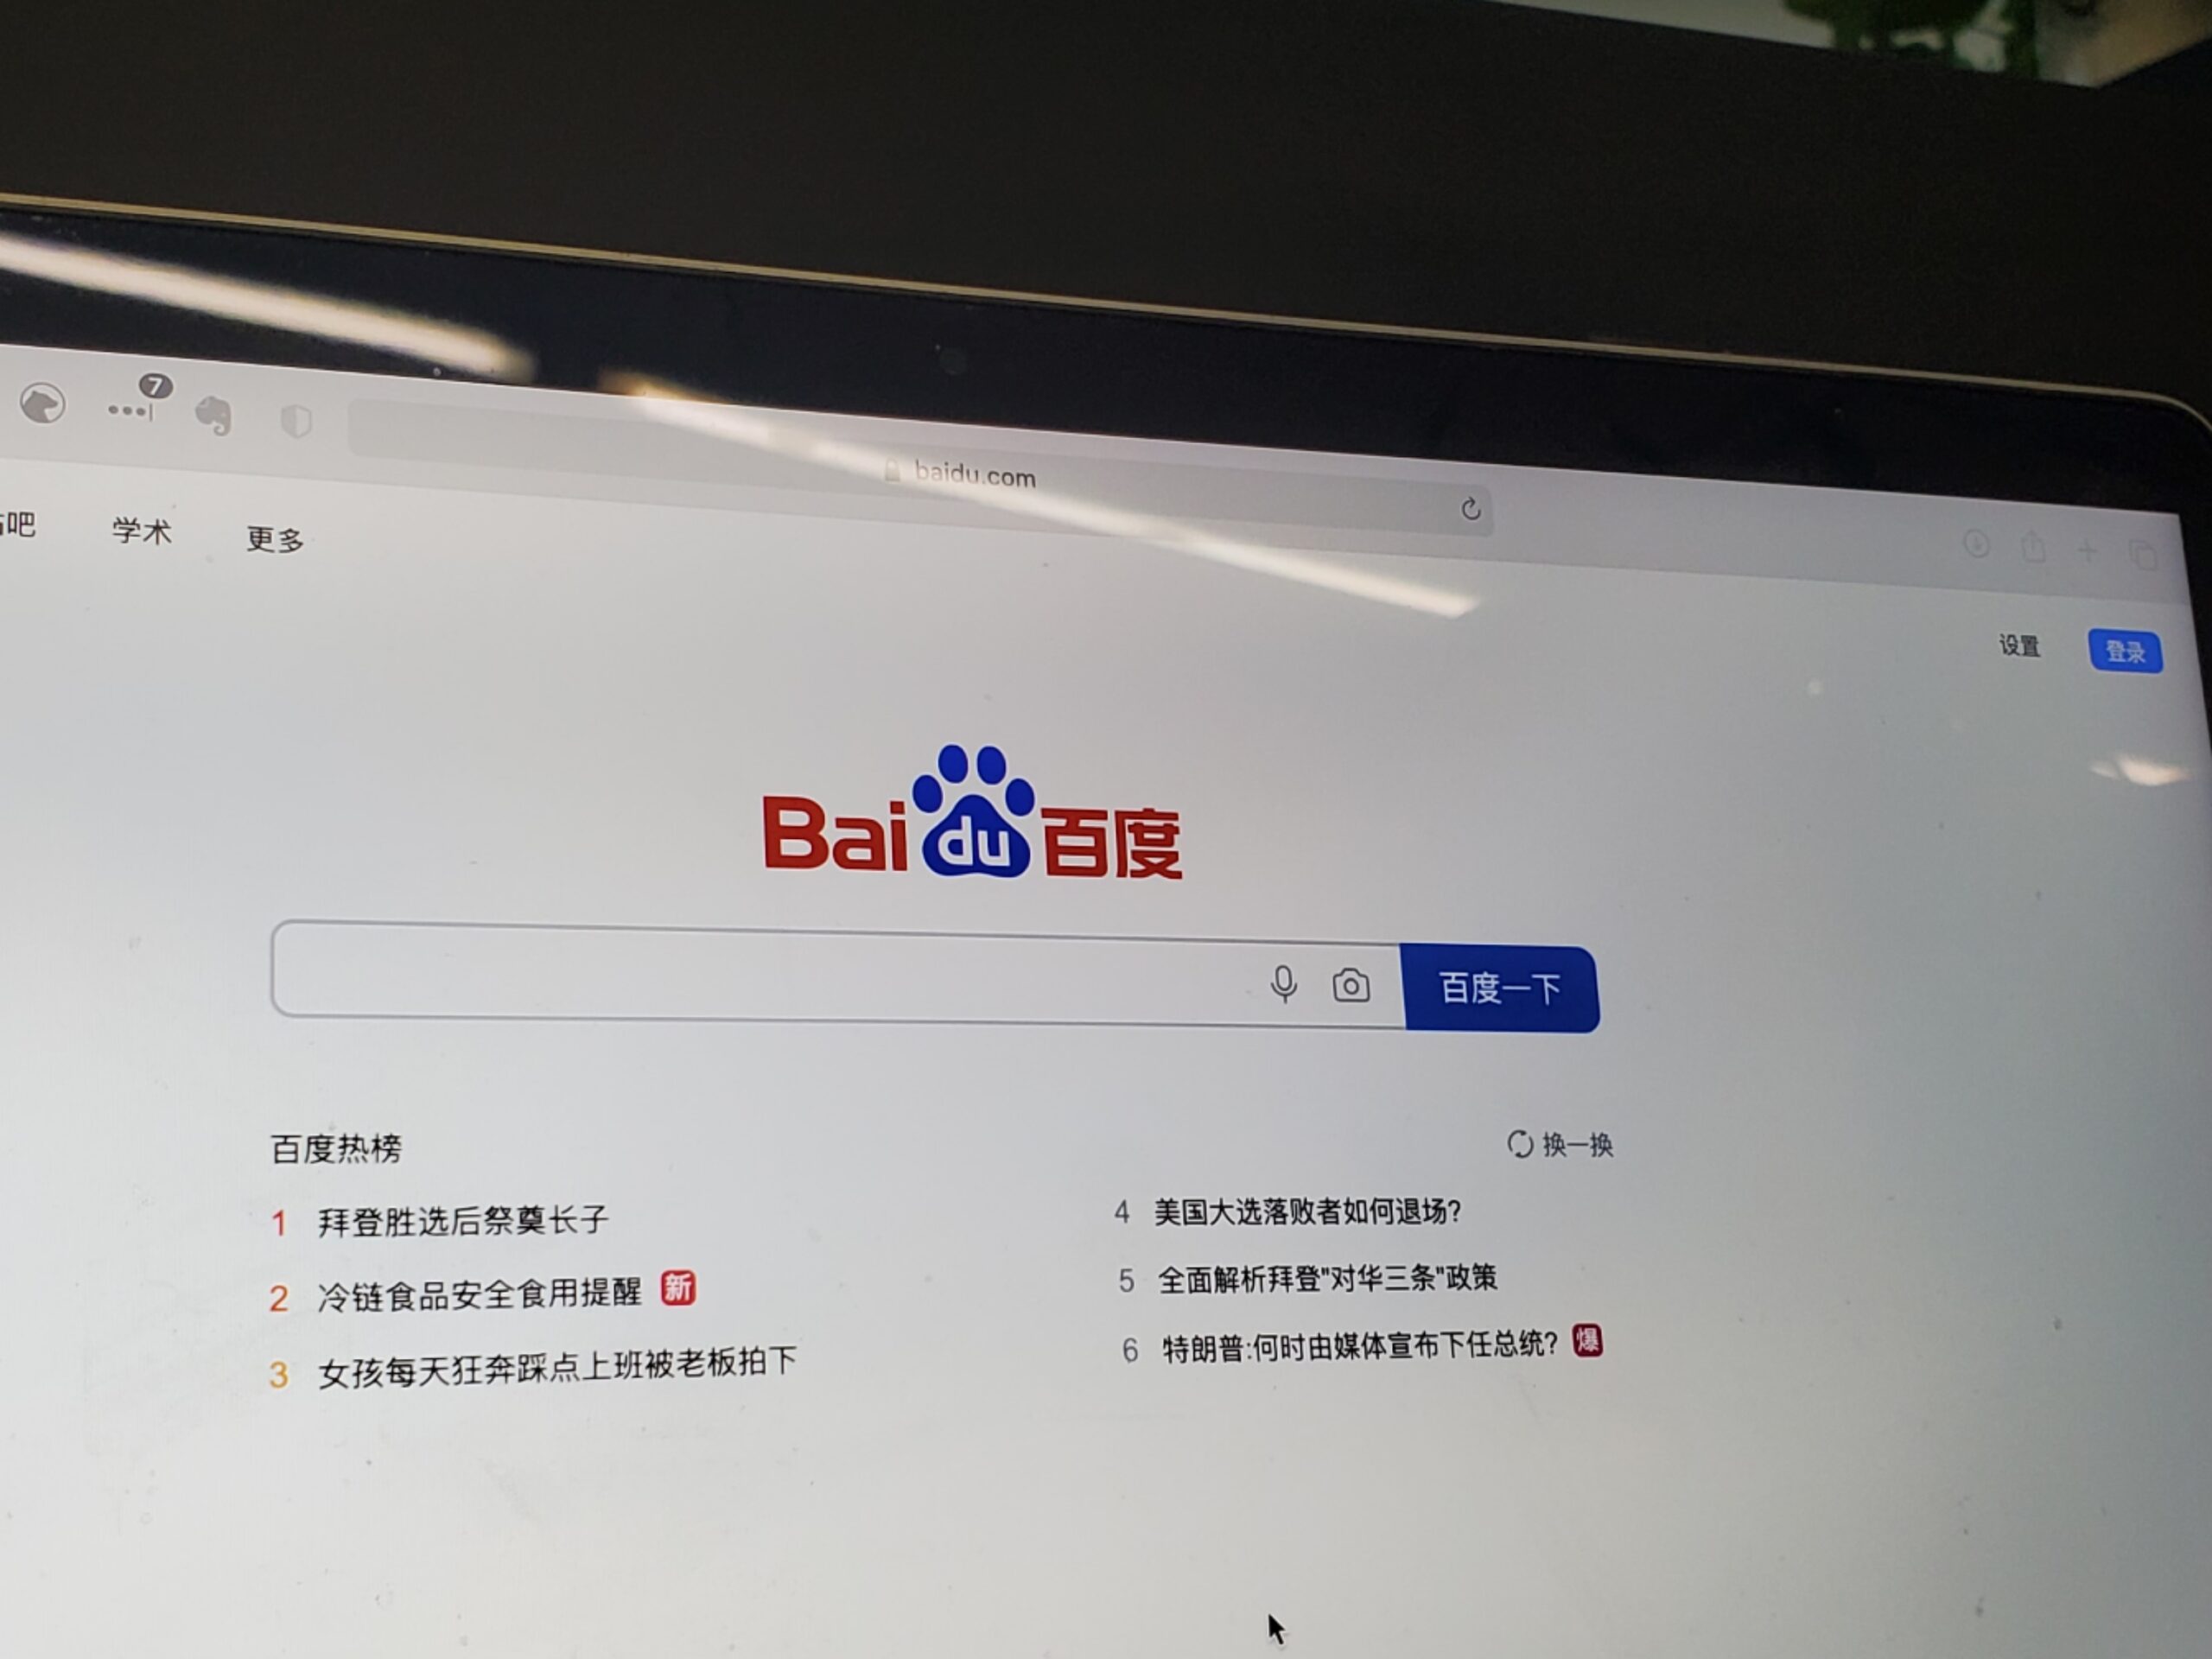 How Baidu lags behind in the competition of Chinese Internet companies